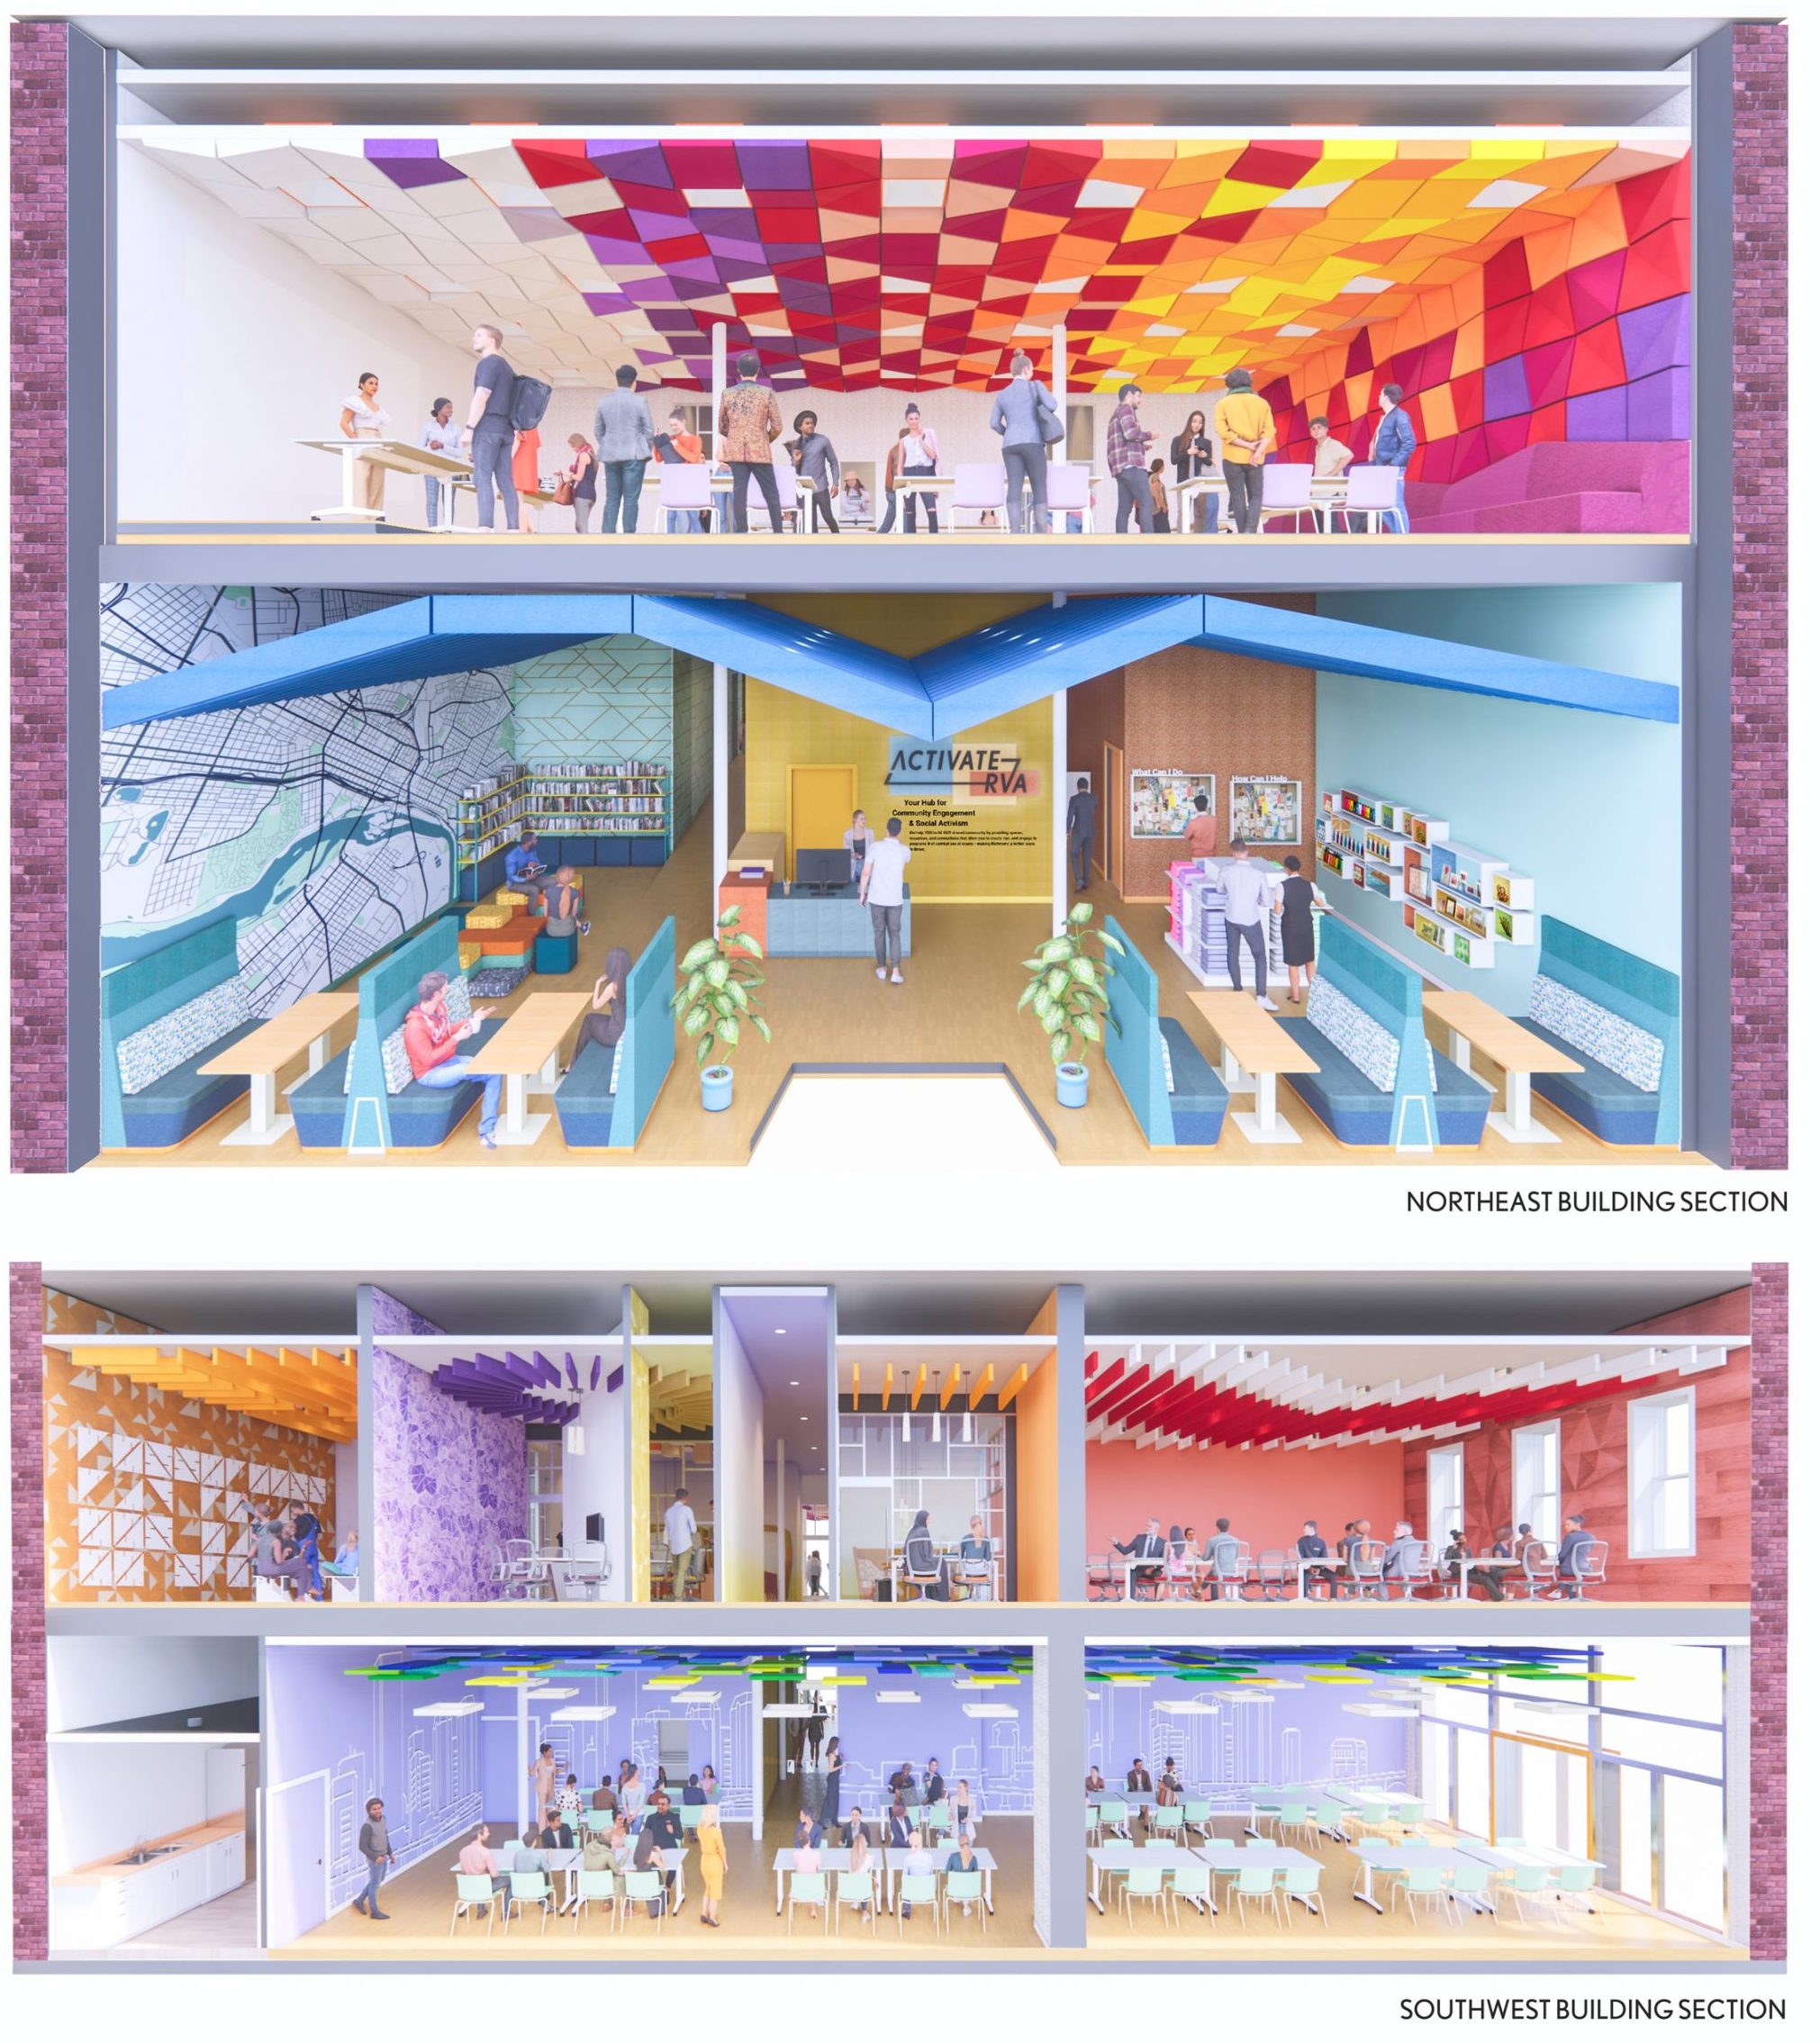 Two colourful interior sections of Activate RVA by Miriam Gibson